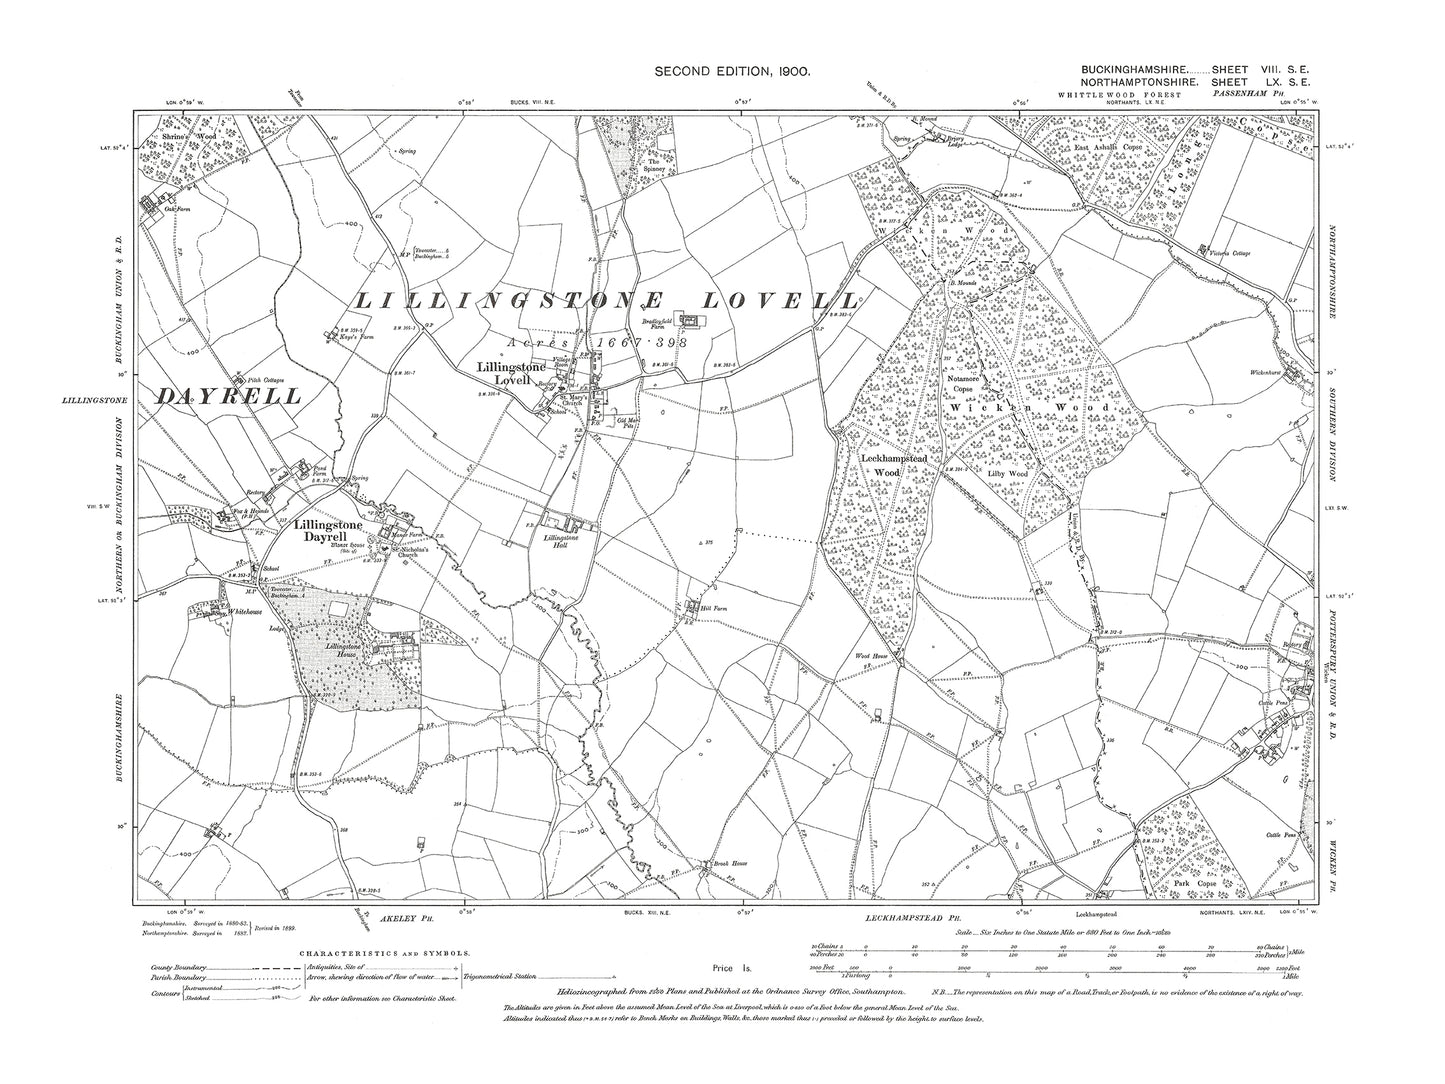 Old OS map dated 1900, showing Lillingstone Lovell and Lillingstone Dayrell in Buckinghamshire - 8SE